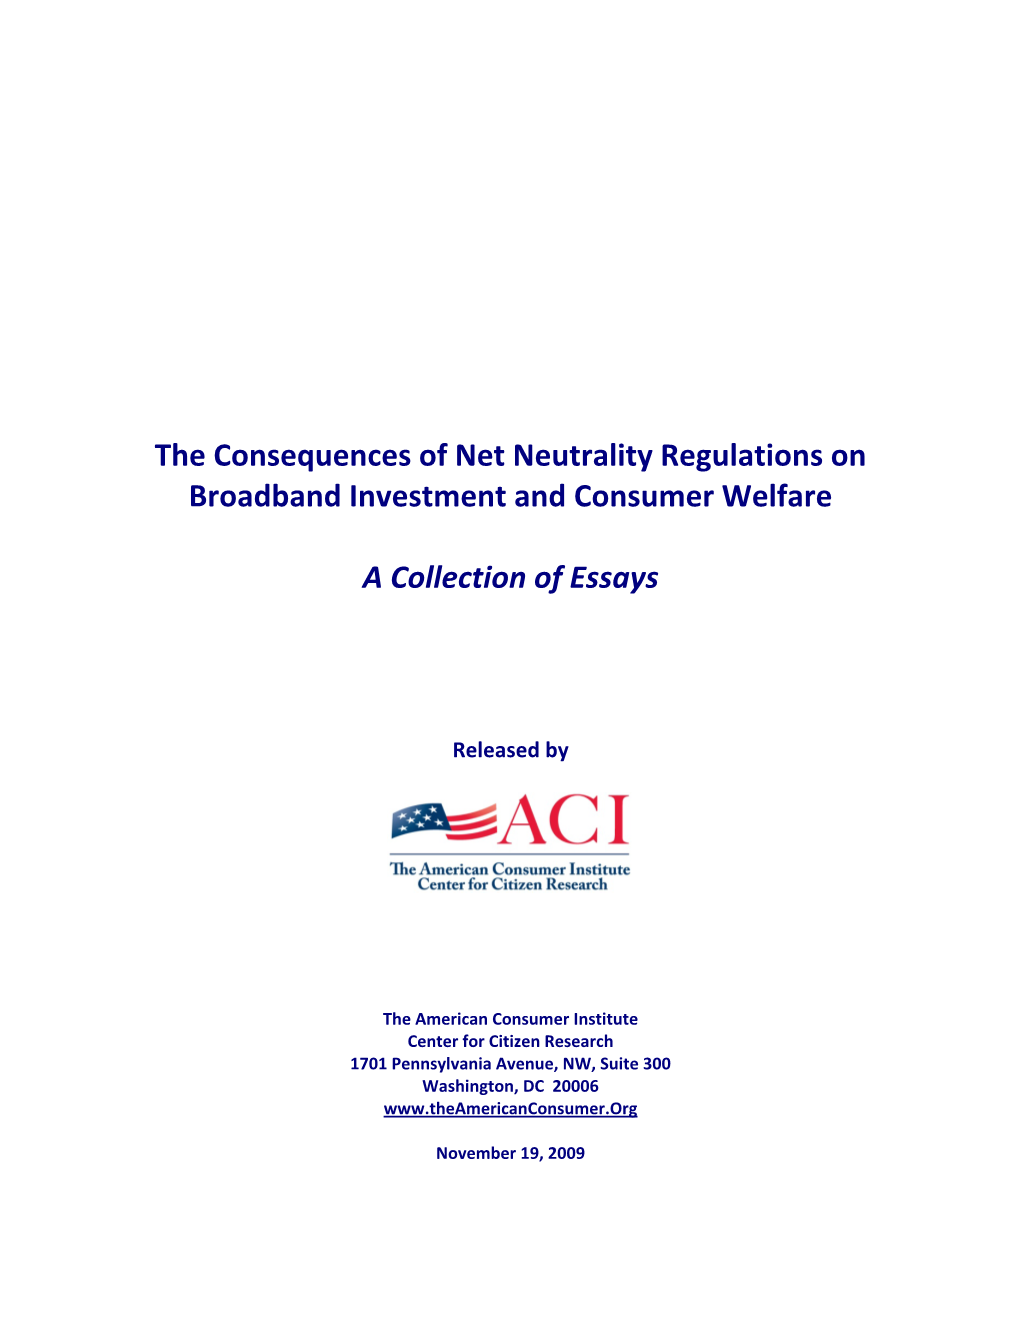 The Consequences of Net Neutrality Regulations on Broadband Investment and Consumer Welfare